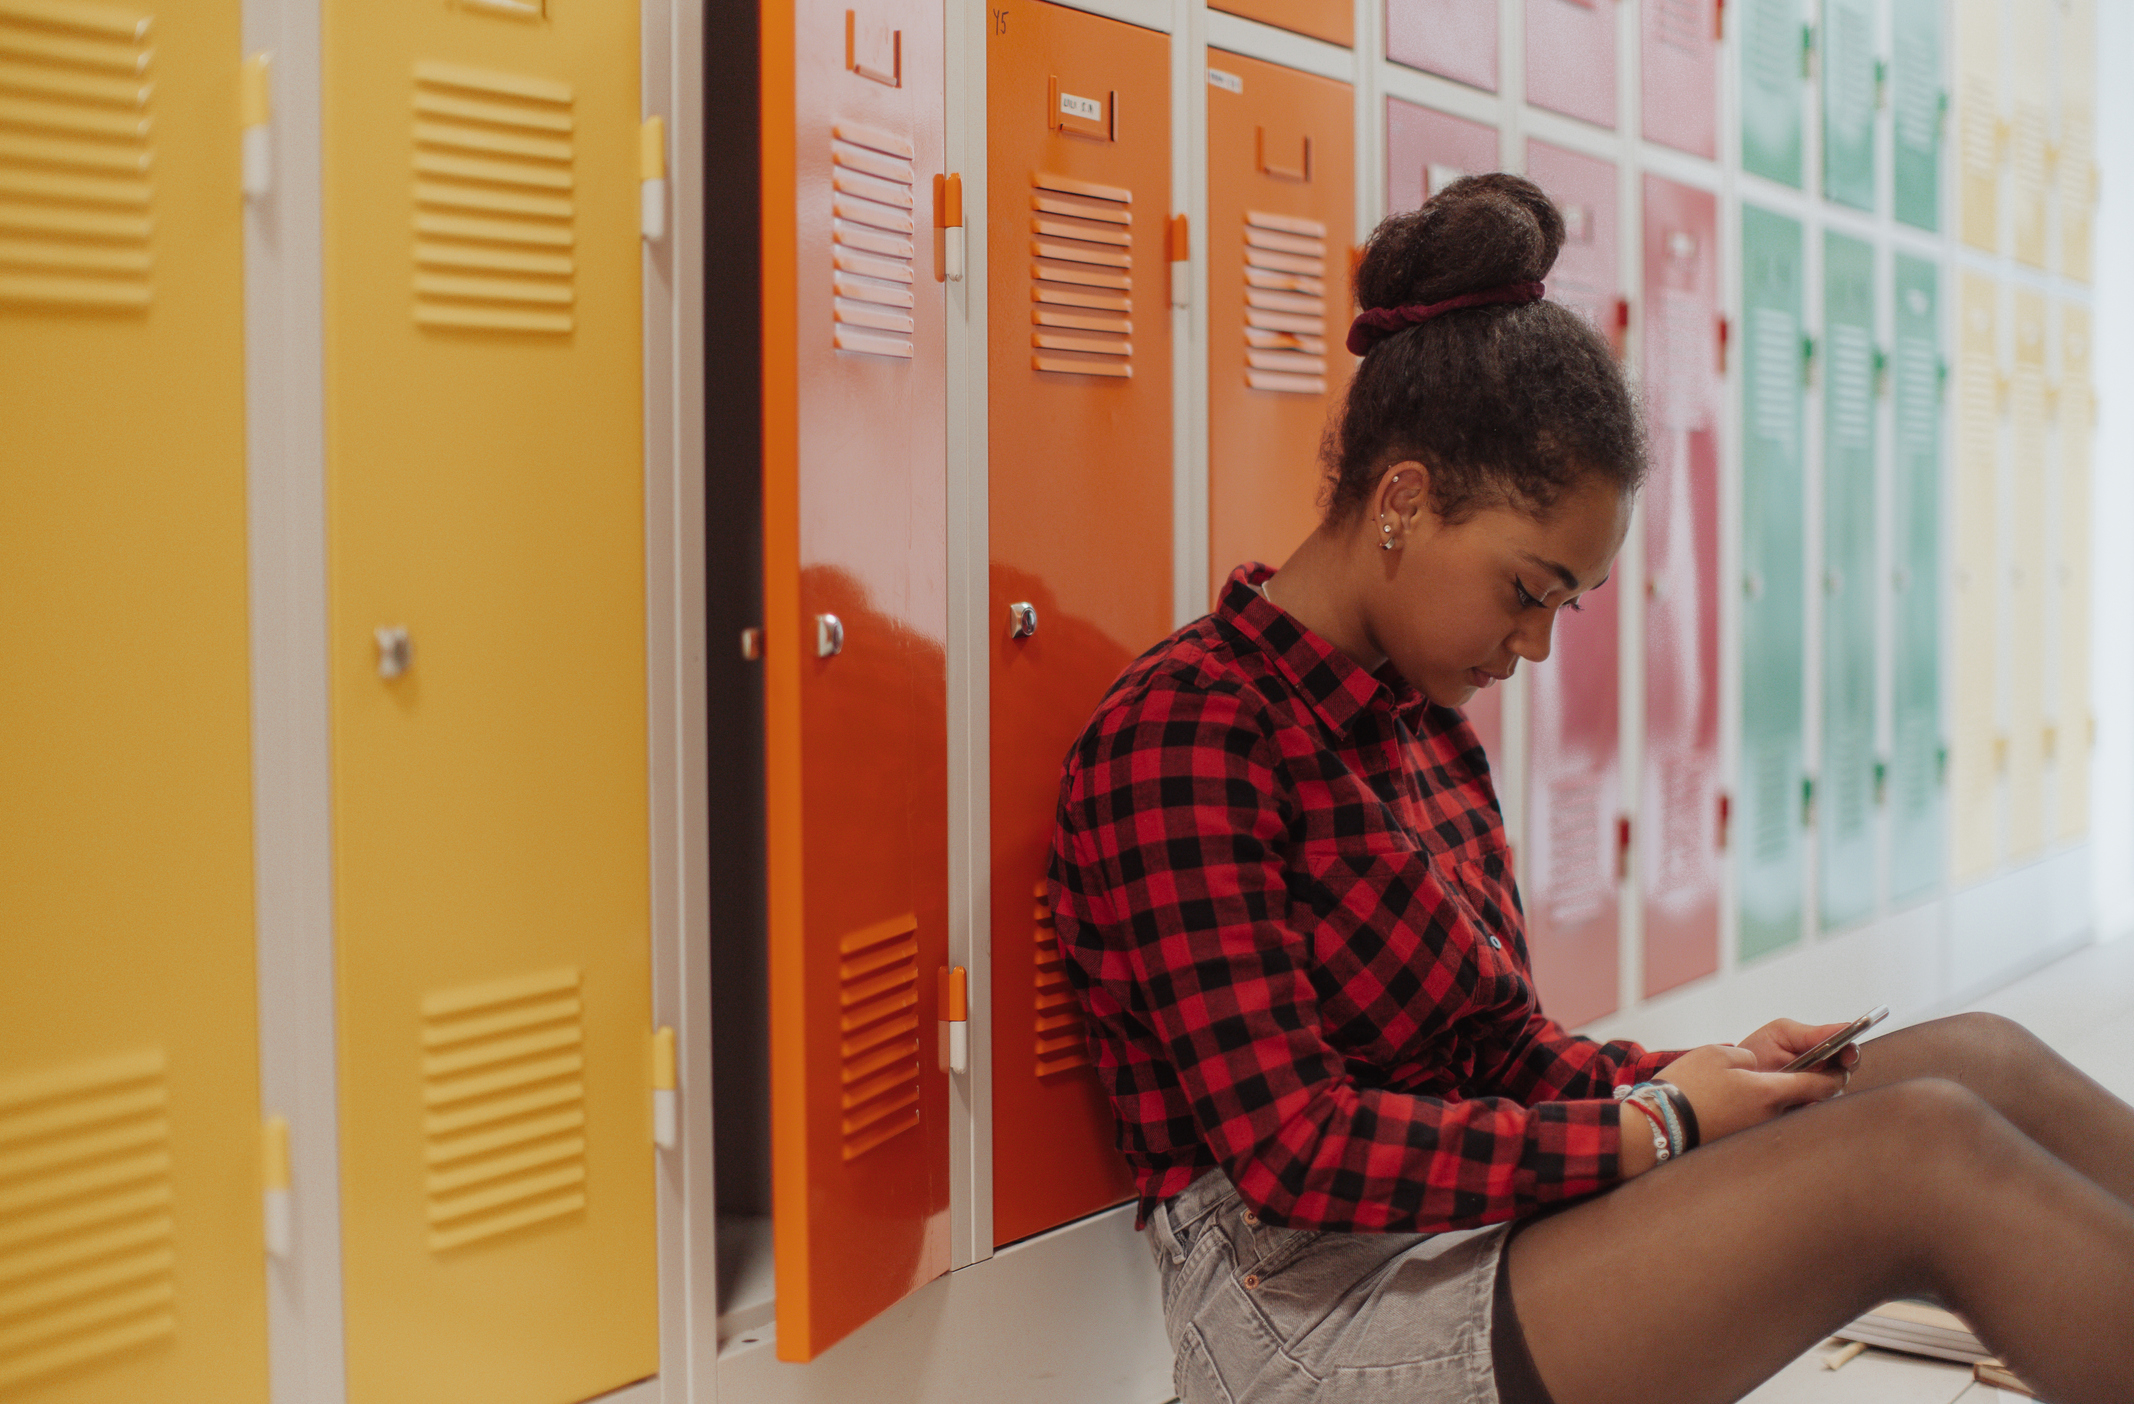 A young girl leaning against a school locker and looking at her phone